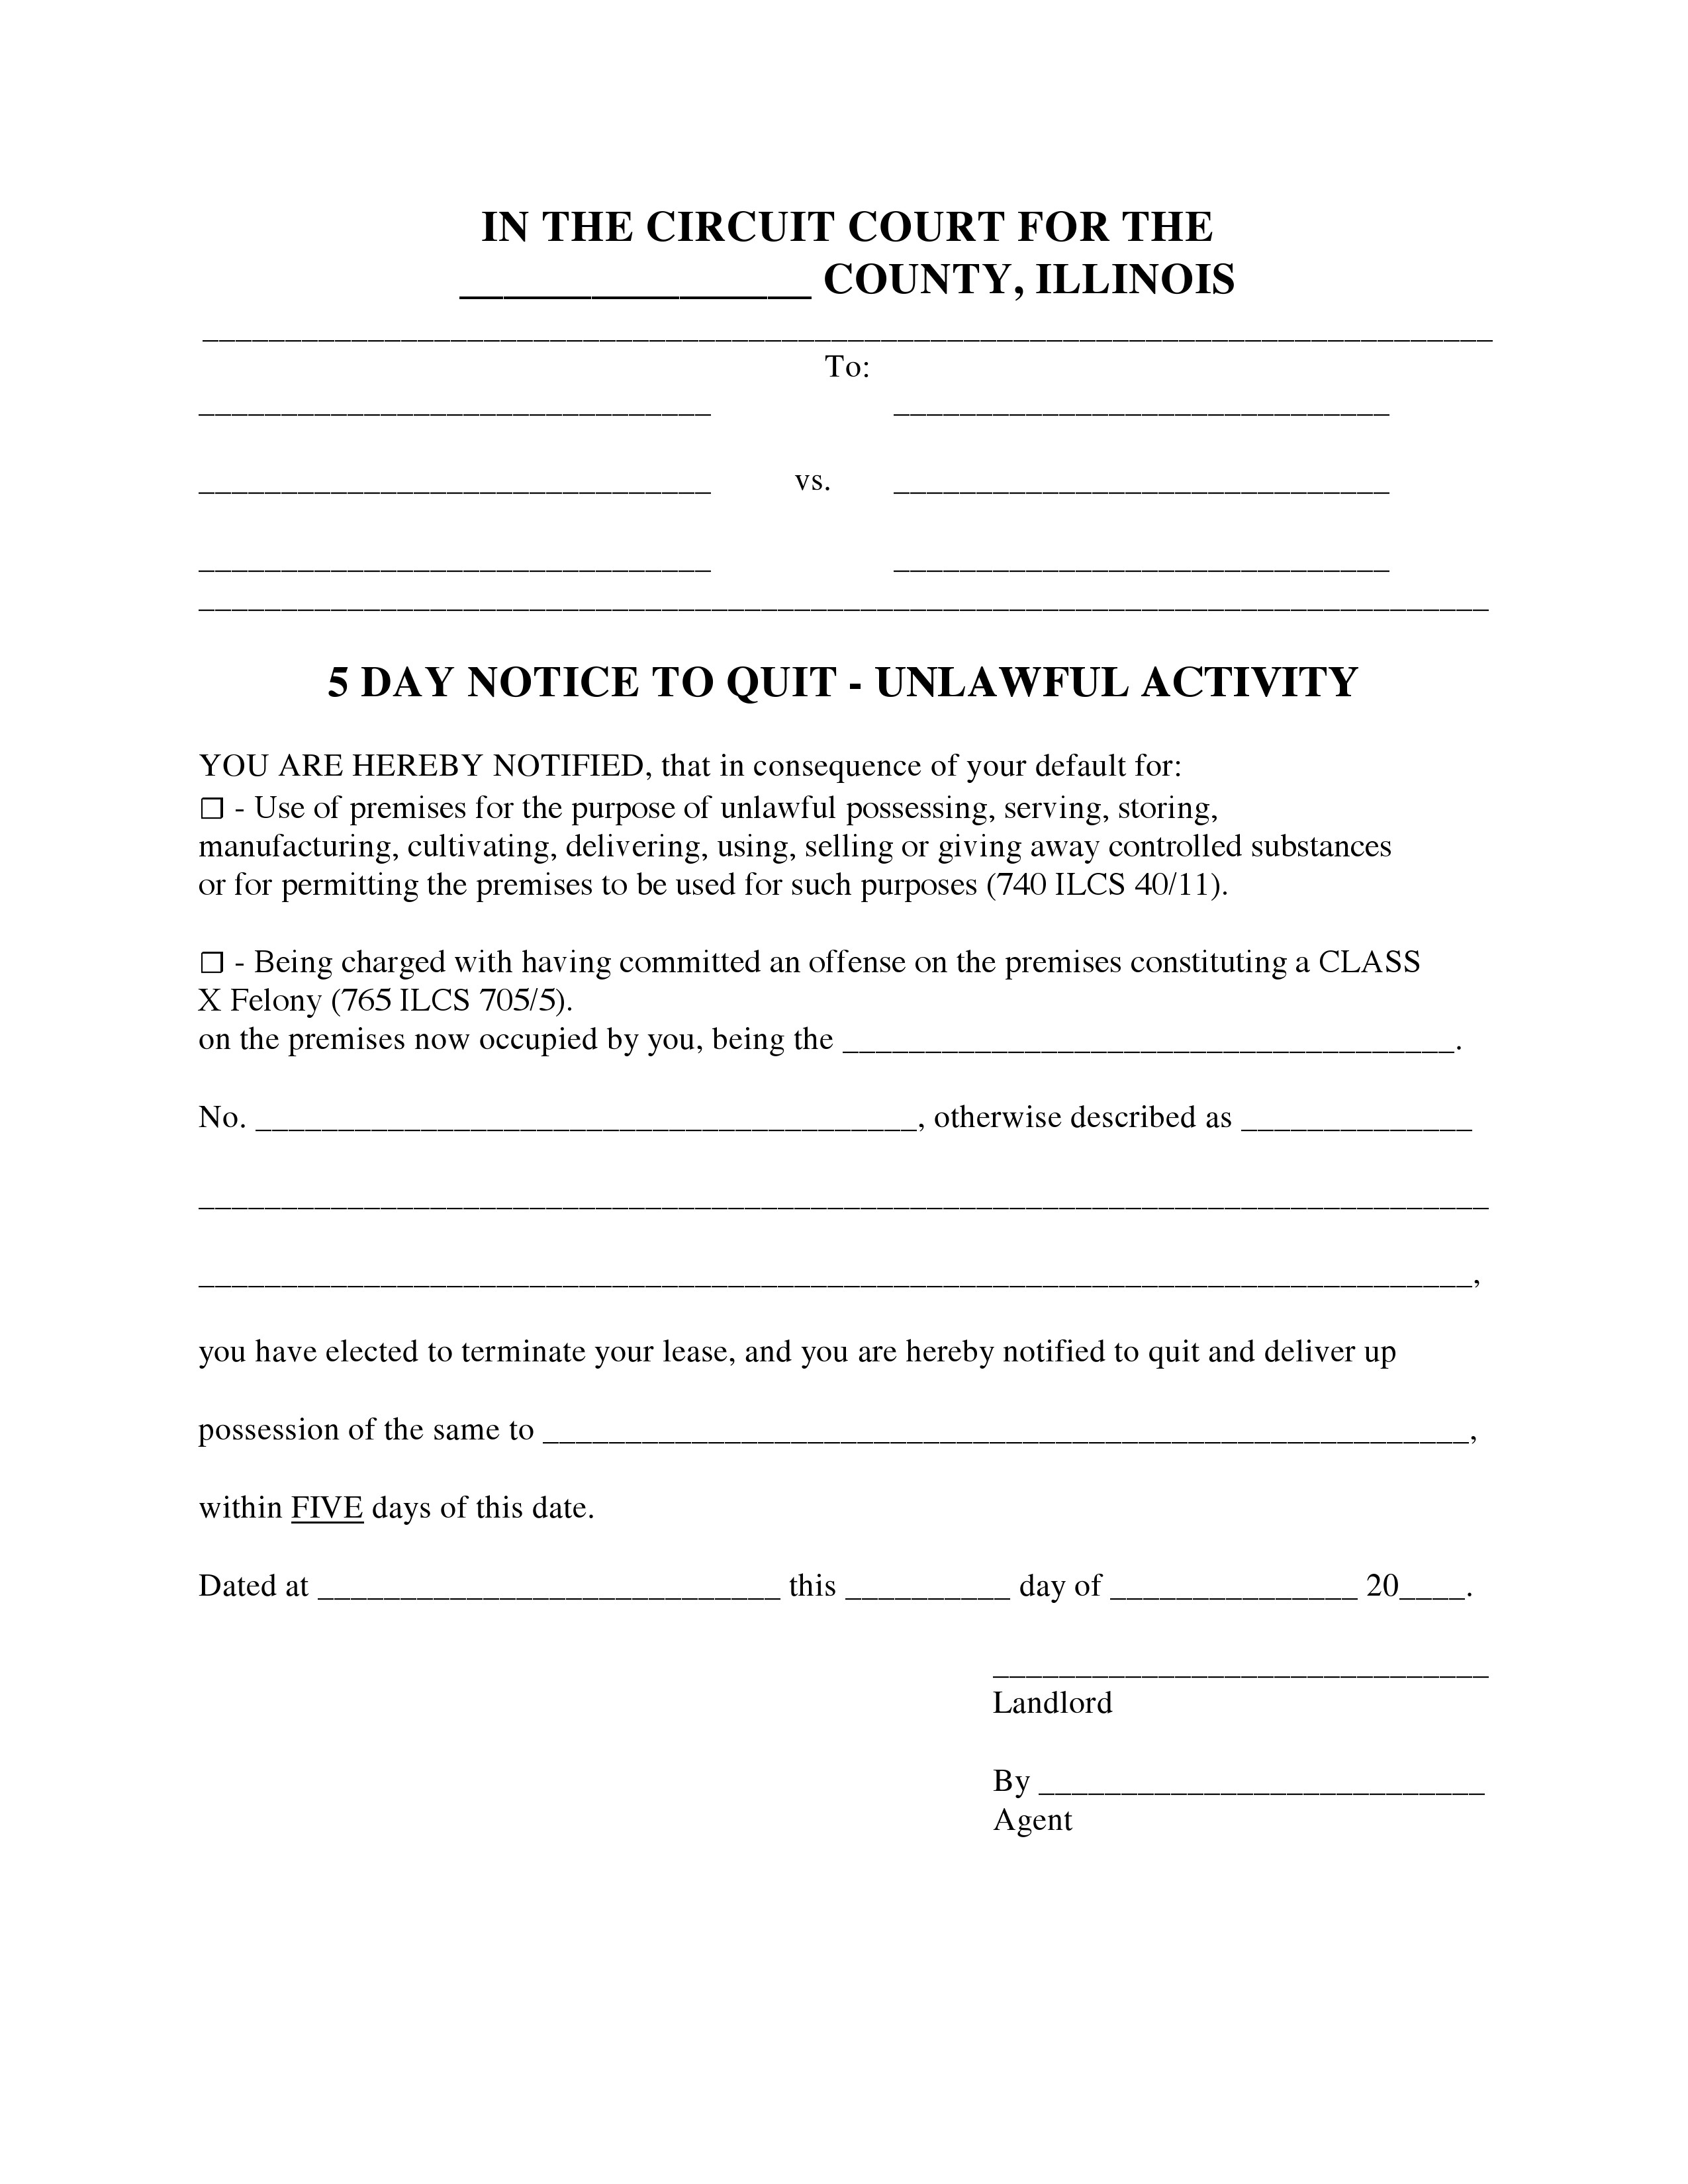 free-illinois-eviction-notice-forms-process-laws-word-pdf-eforms-free